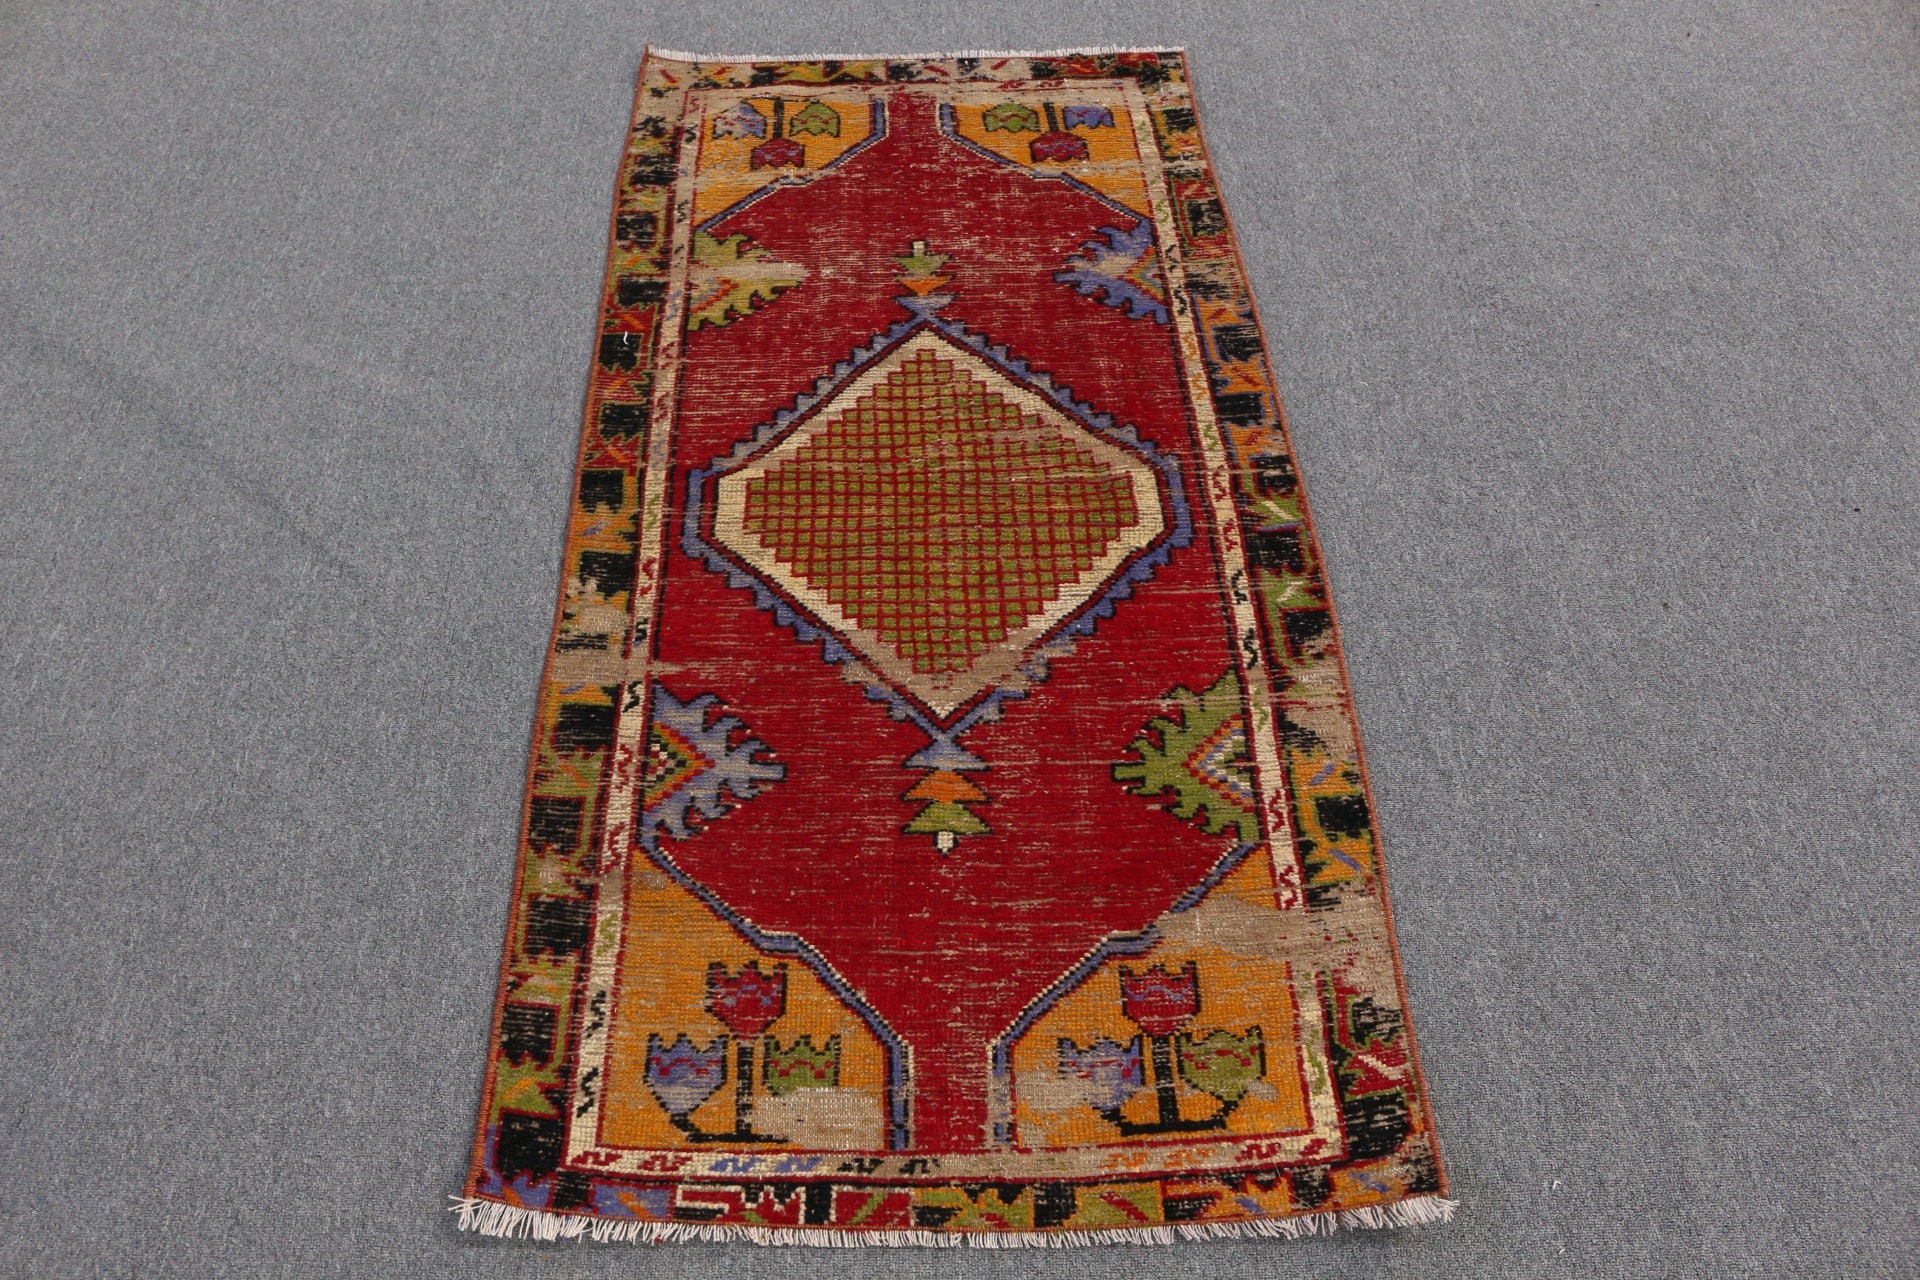 2.5x5.2 ft Small Rug, Car Mat Rug, Rugs for Kitchen, Wool Rug, Red Antique Rugs, Bath Rug, Vintage Rug, Turkish Rug, Home Decor Rugs